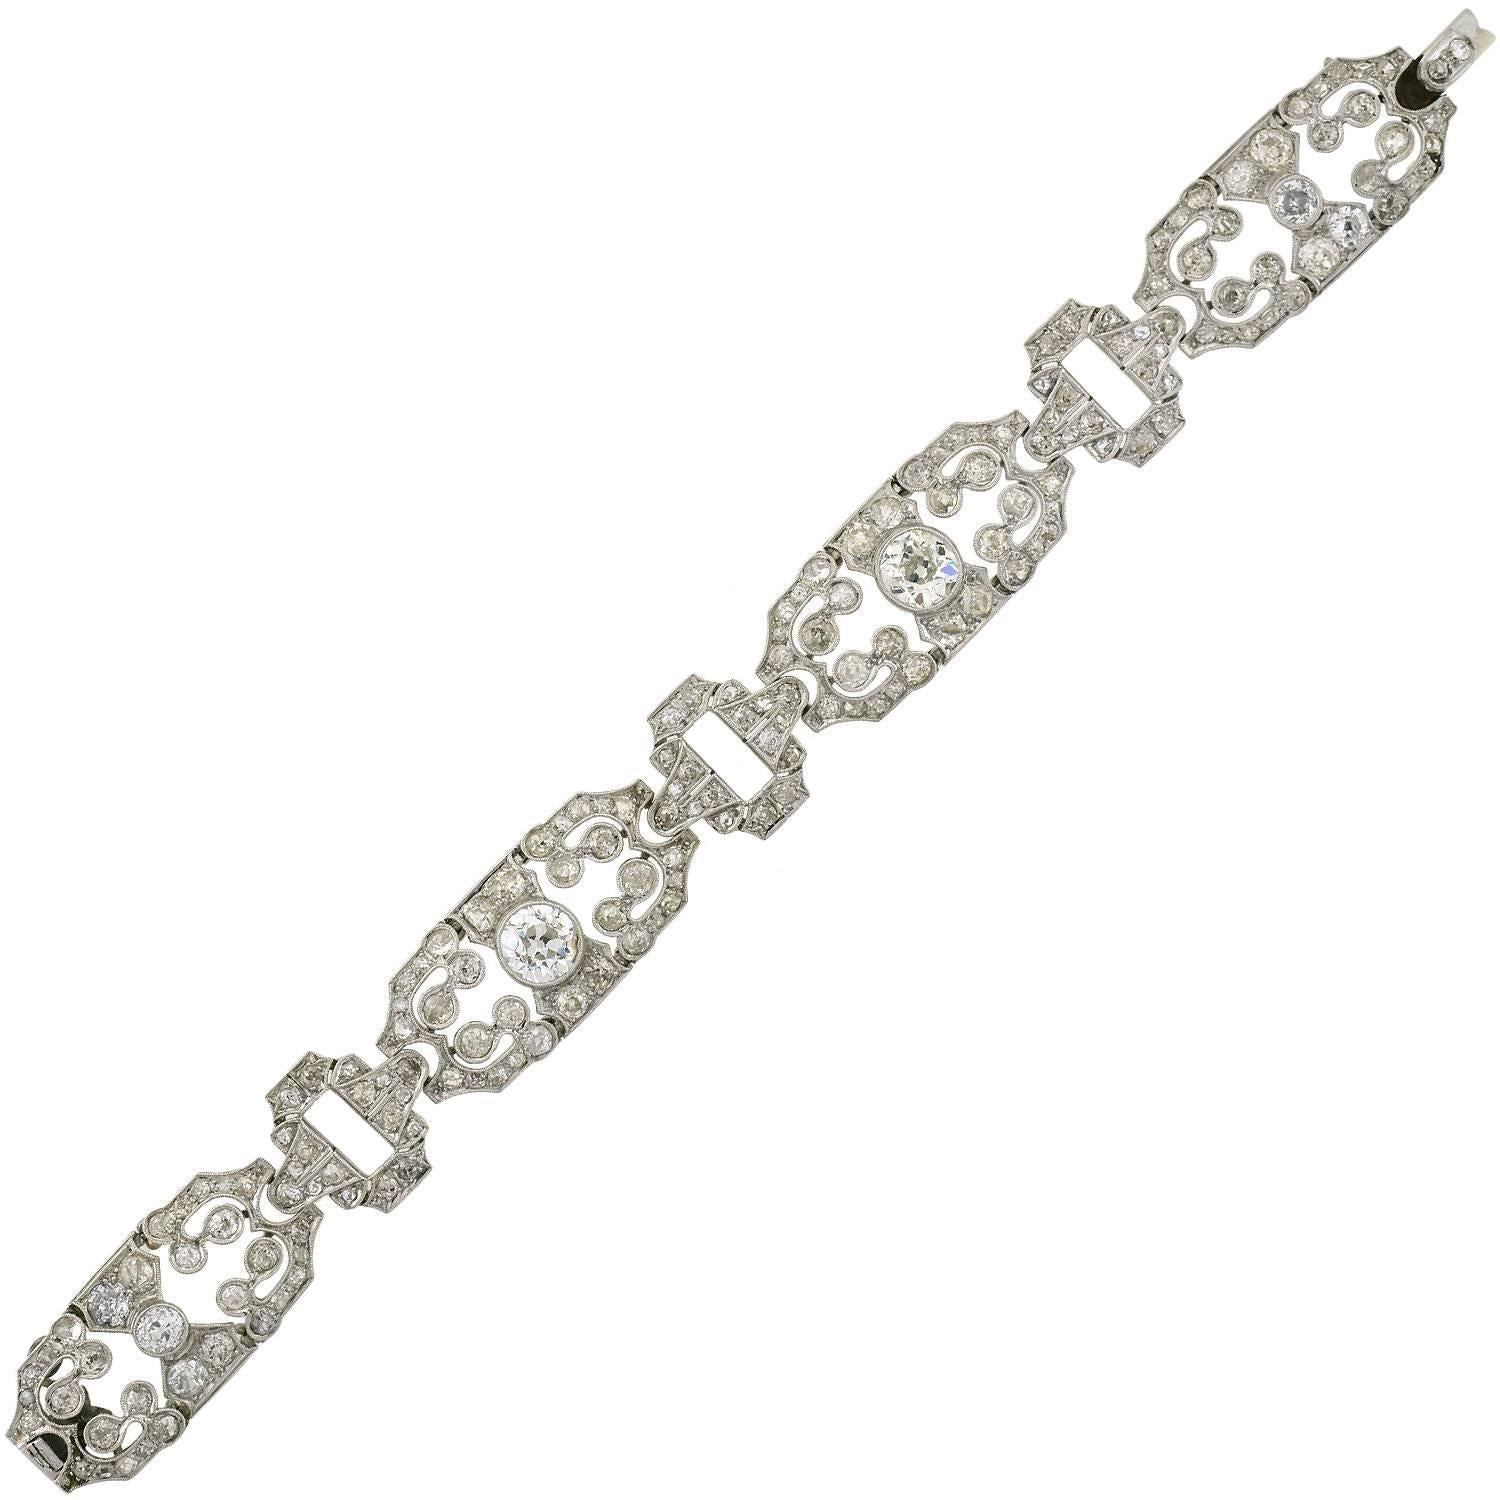 An absolutely exquisite diamond encrusted bracelet from the Art Deco (ca1920) era! This gorgeous handmade piece is made of platinum and features 4 diamond encrusted links that alternate with more subtle, smaller diamond links. In total, the bracelet